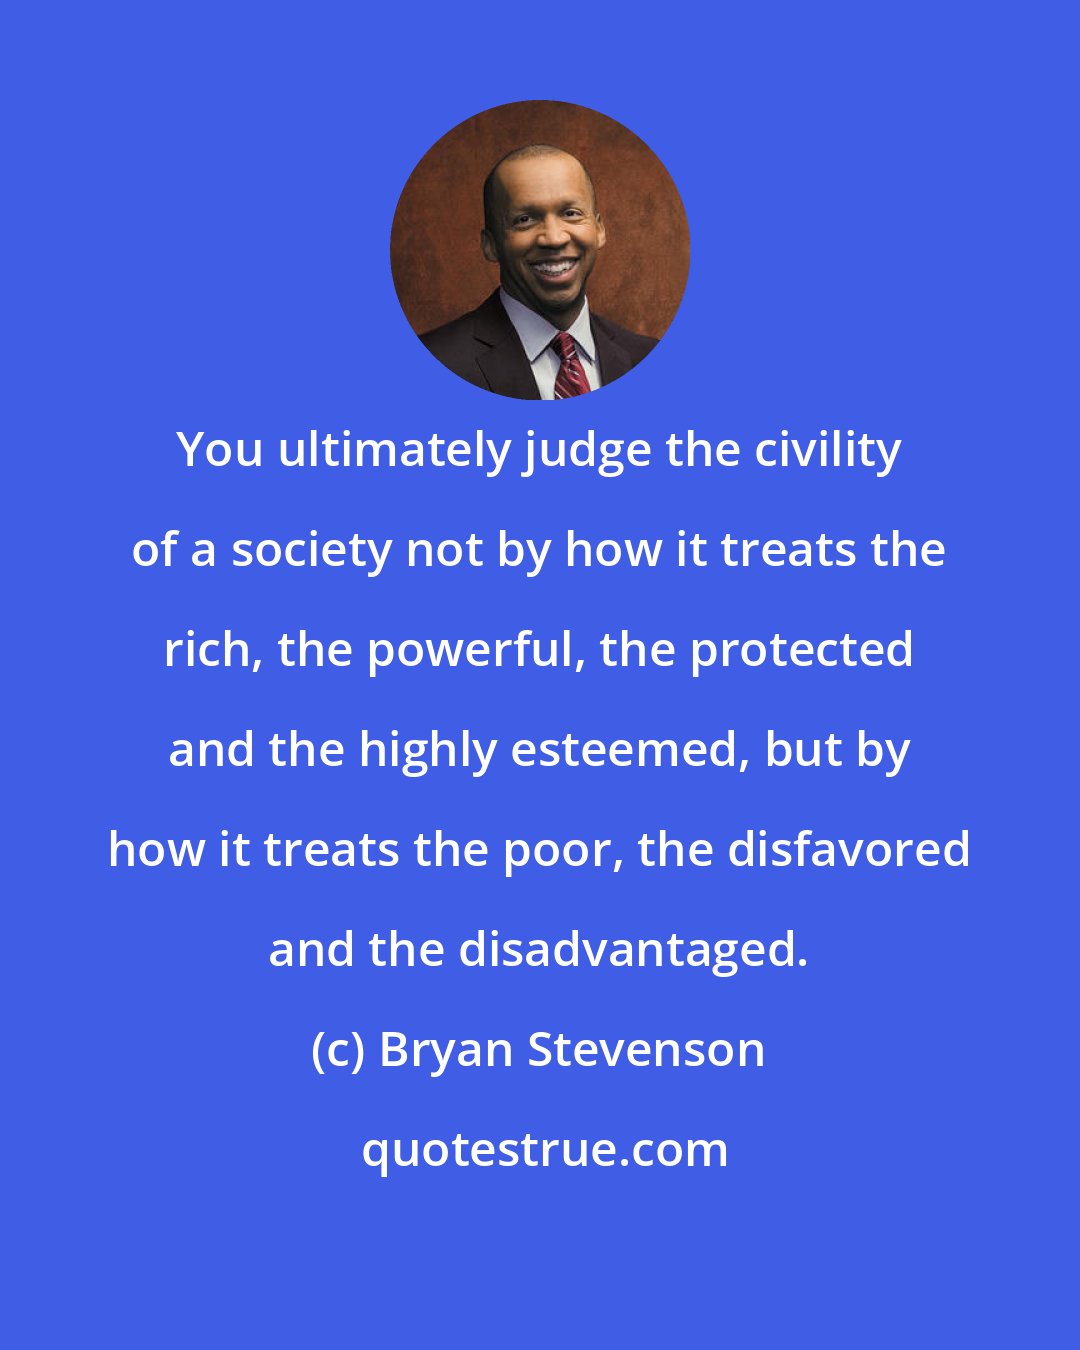 Bryan Stevenson: You ultimately judge the civility of a society not by how it treats the rich, the powerful, the protected and the highly esteemed, but by how it treats the poor, the disfavored and the disadvantaged.